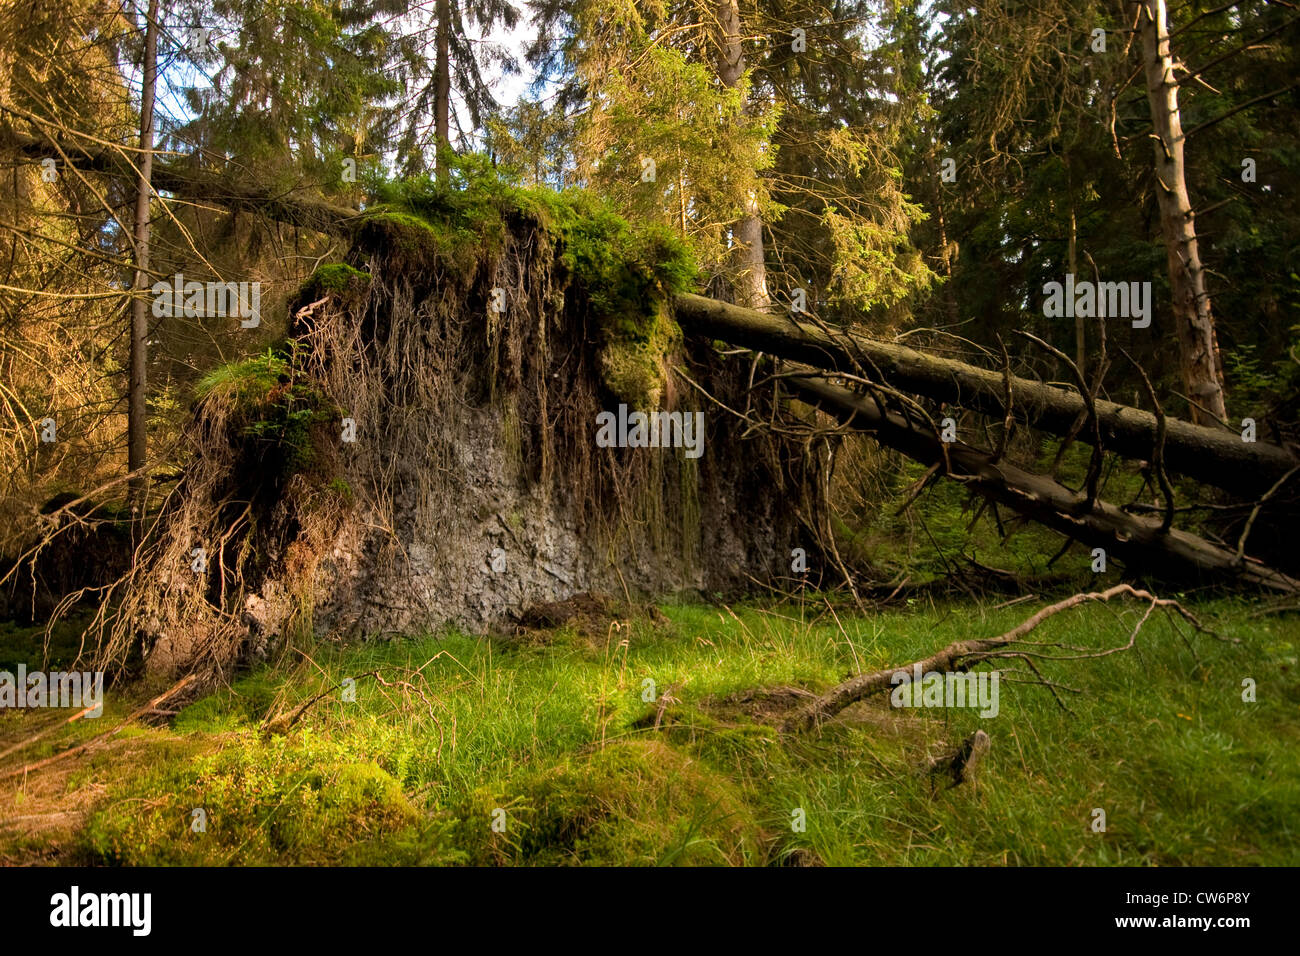 Norway spruce (Picea abies), trees in a spruce forest rooted out, Germany, Rhineland-Palatinate Stock Photo